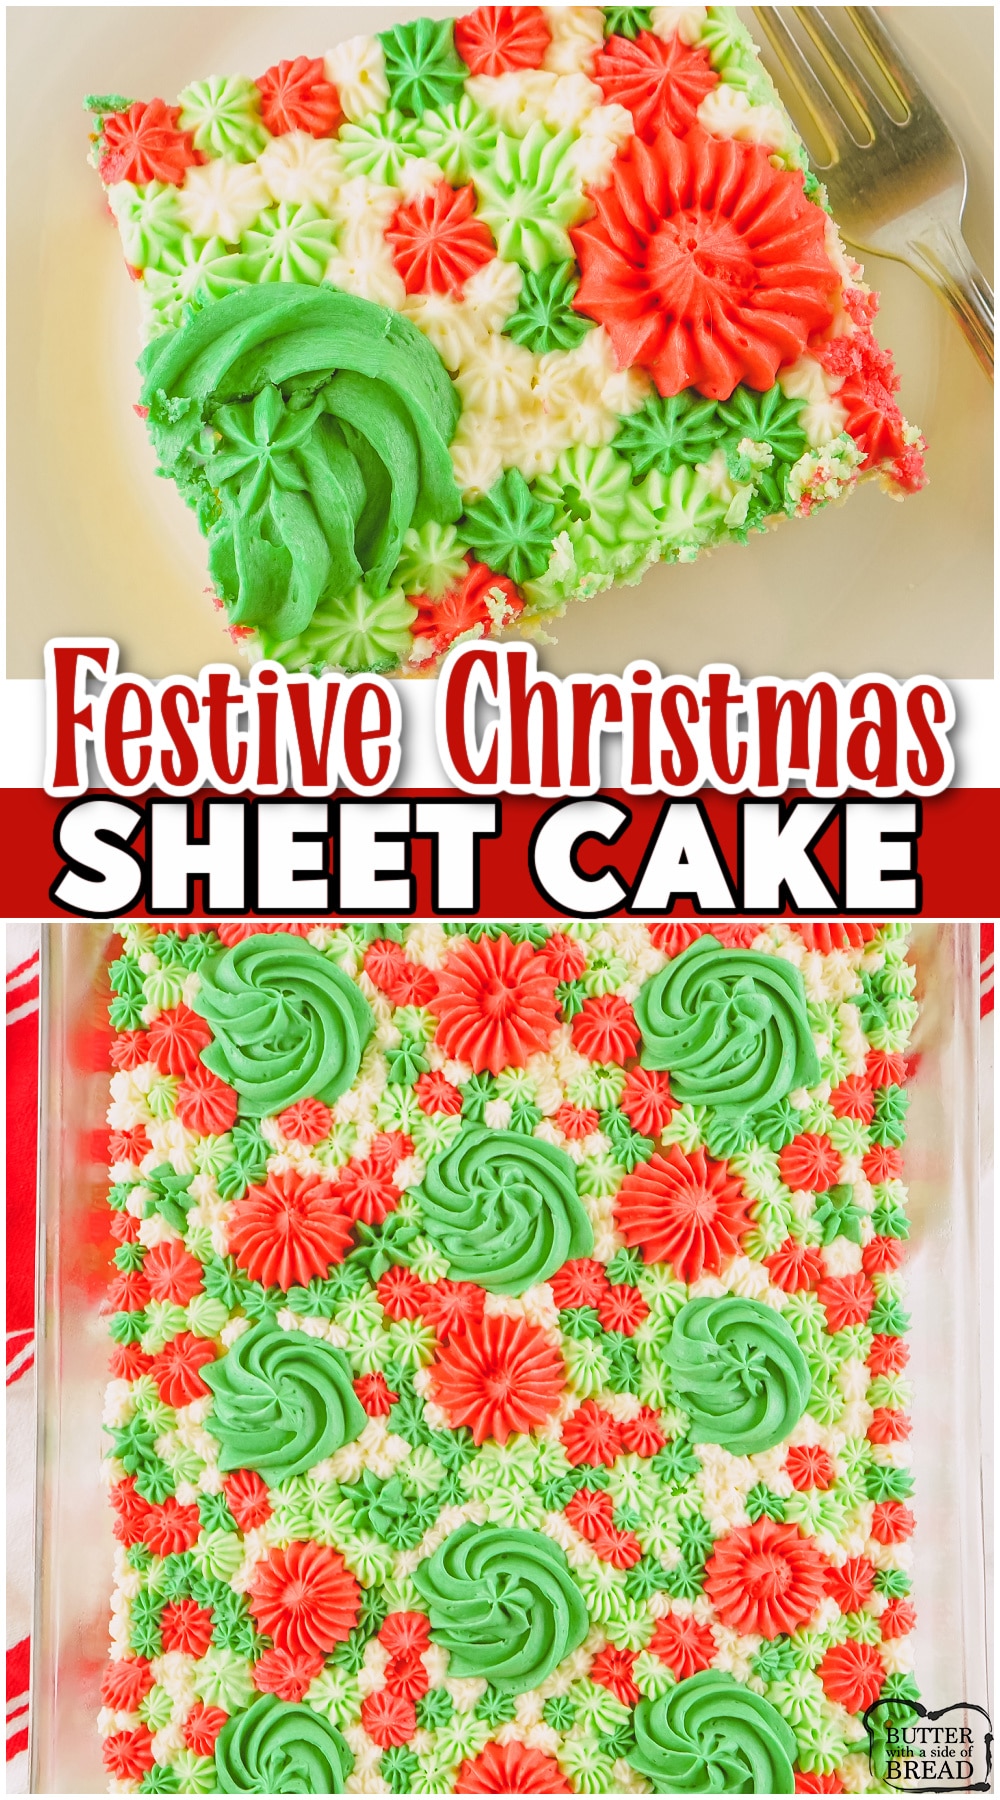 Lovely Christmas Sheet Cake made from scratch & sure to impress! Festive holiday colors abound in this delightful 9x13 sheet cake recipe. 